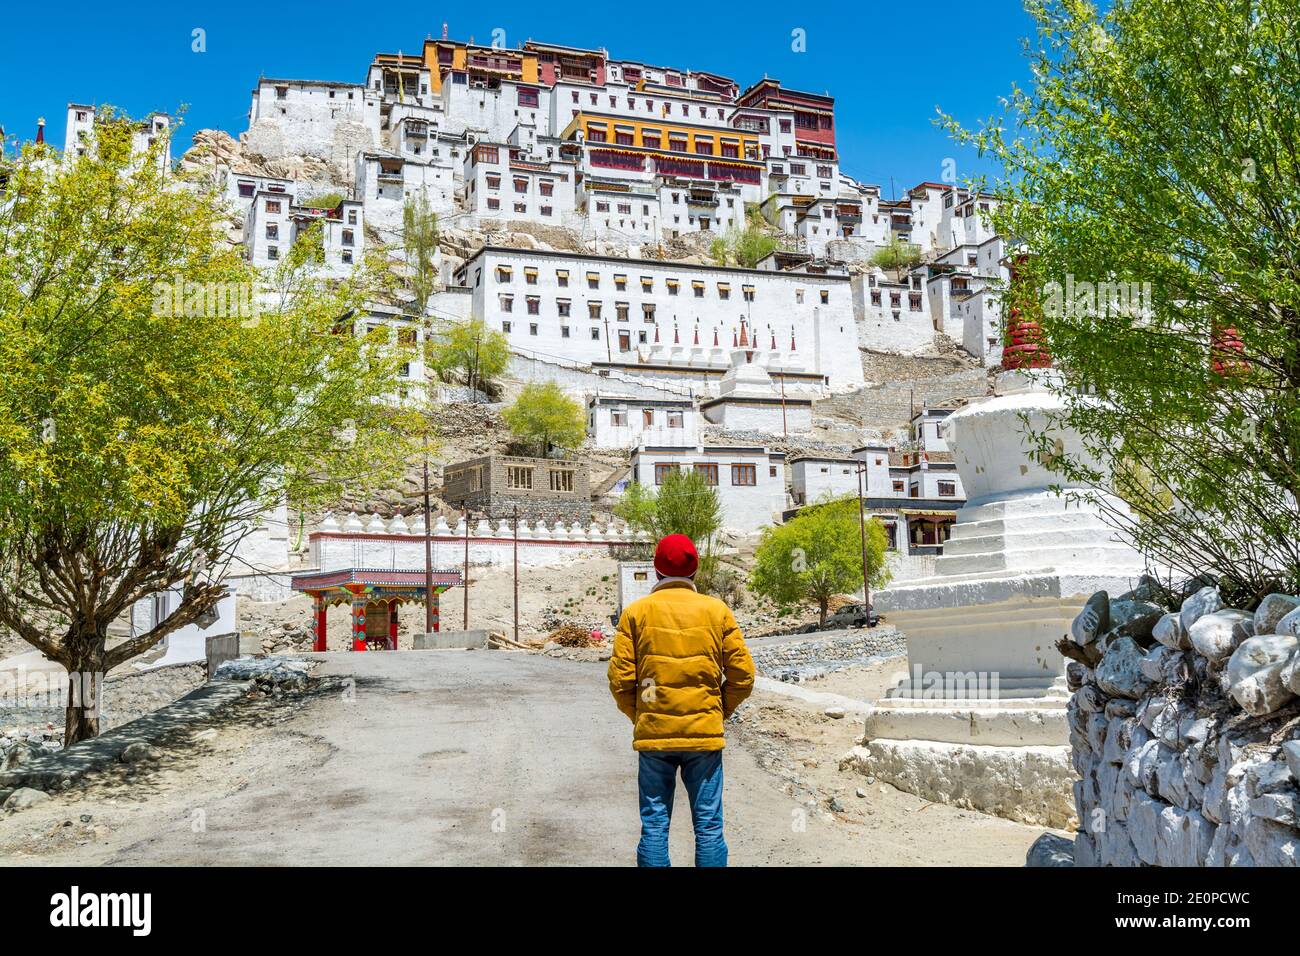 A male tourist standing in front of Thiksey Monastery or Thiksey Gompa, A famous Tibetan temple in Ladakh, India Stock Photo